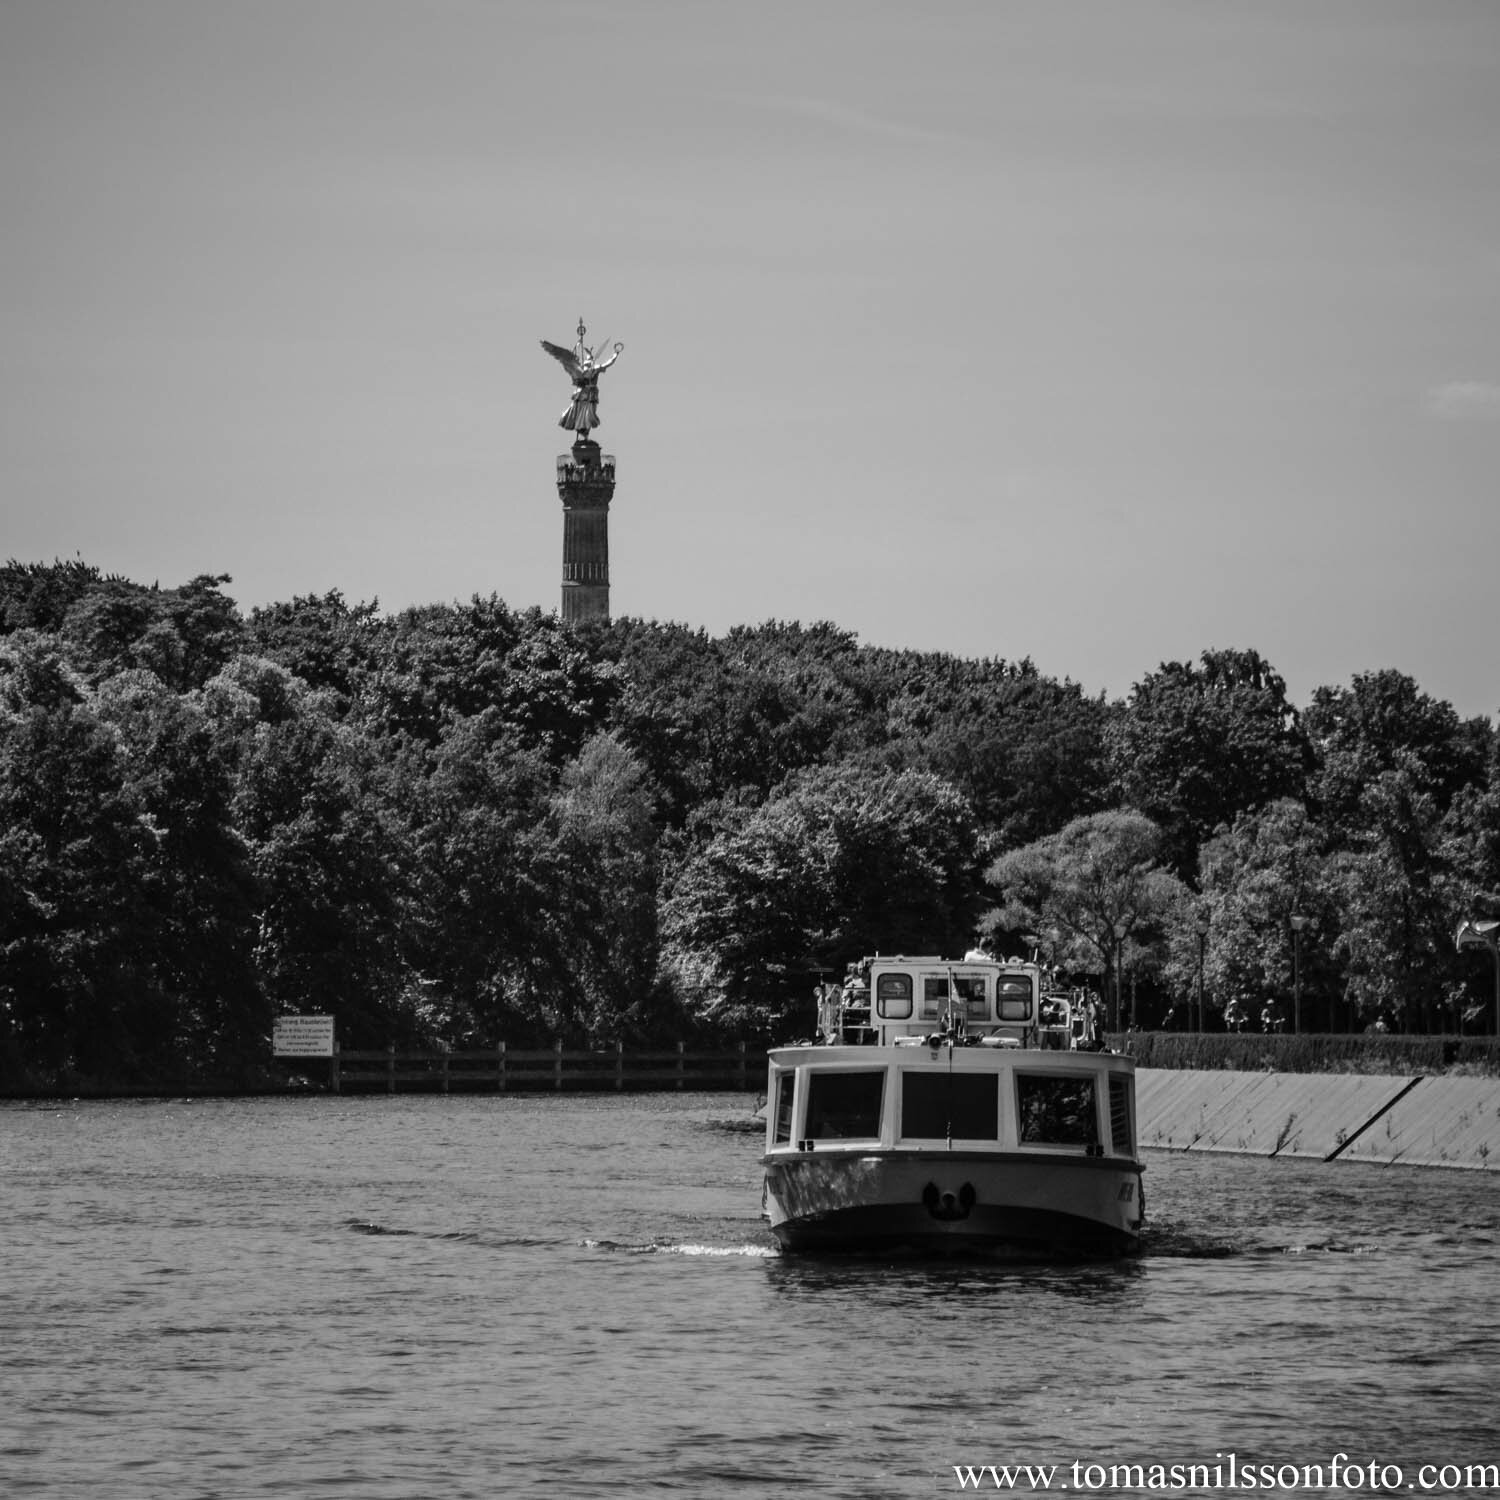 Day 191 - July 10: Archive Deepdive - Berlin River Ride